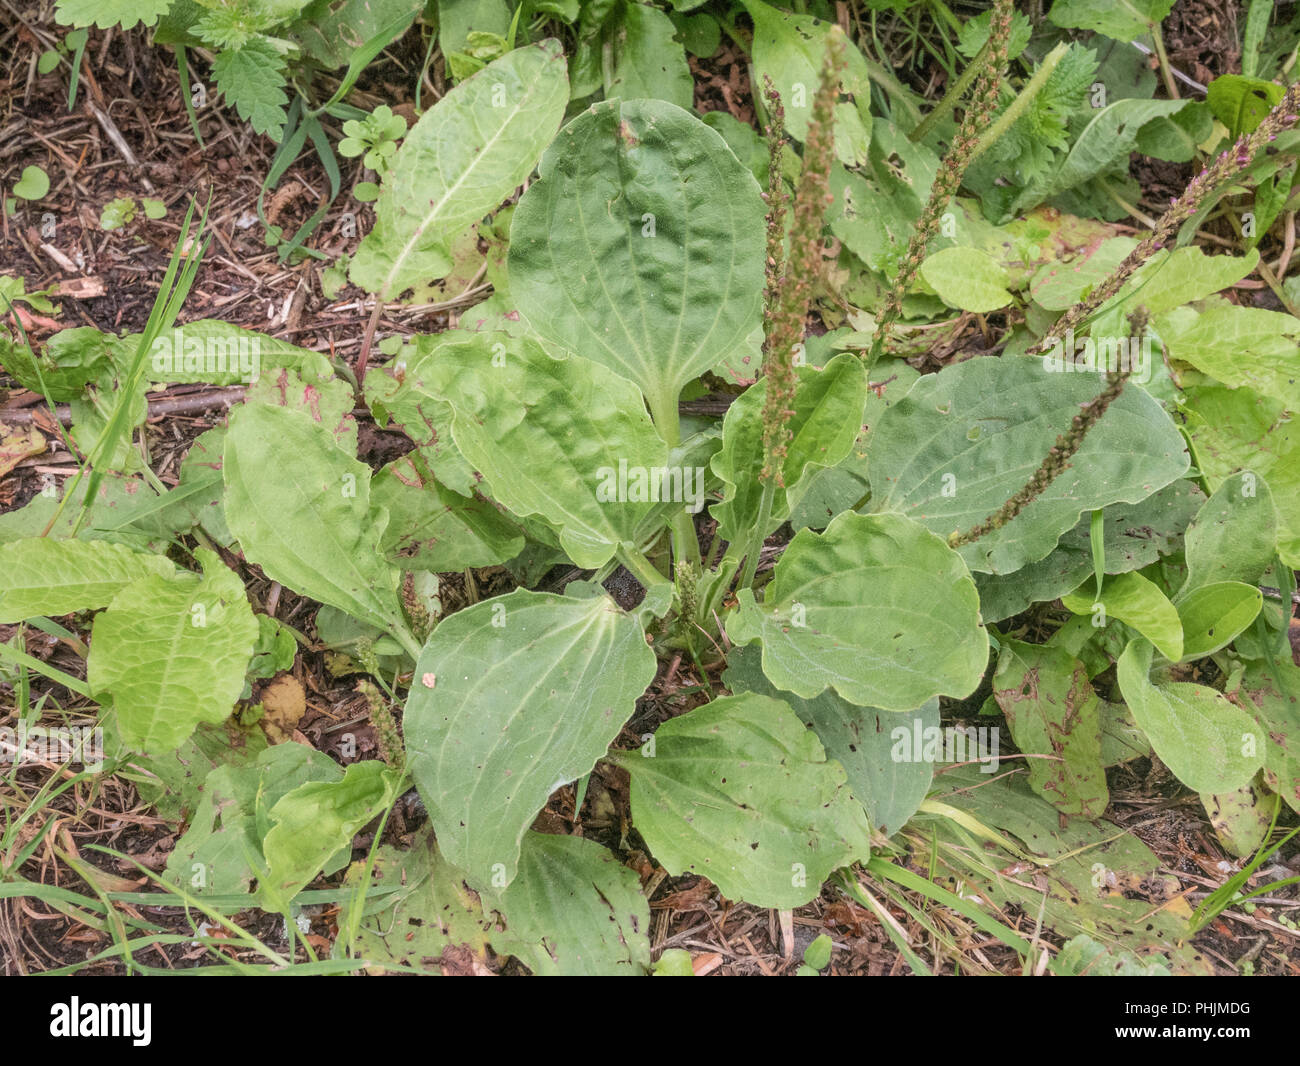 Leaves / foliage of Greater Plantain / Plantago major on a country footpath. Sometimes foraged and cooked as a survival food. Stock Photo